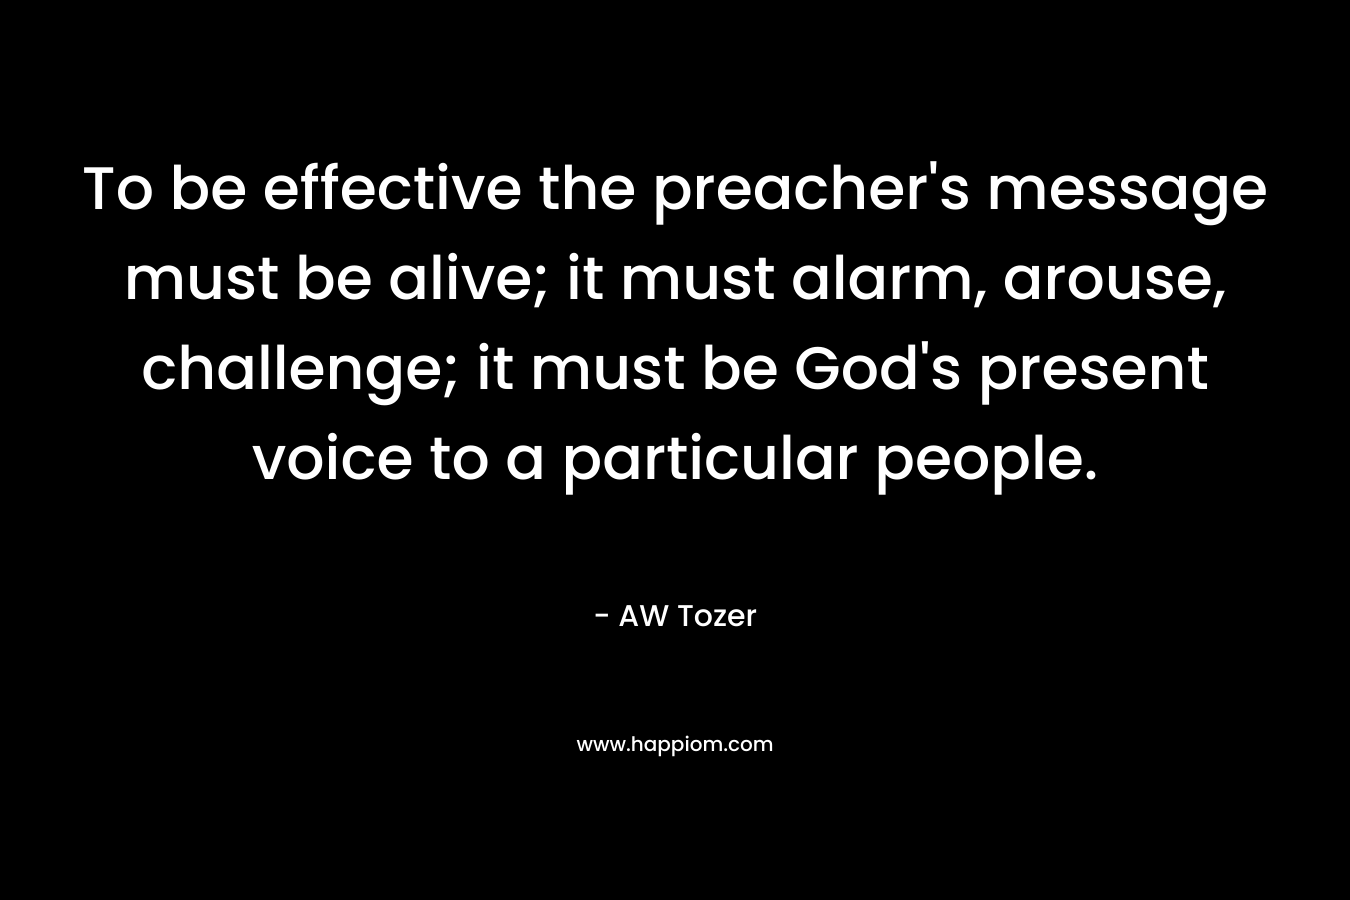 To be effective the preacher’s message must be alive; it must alarm, arouse, challenge; it must be God’s present voice to a particular people. – AW Tozer